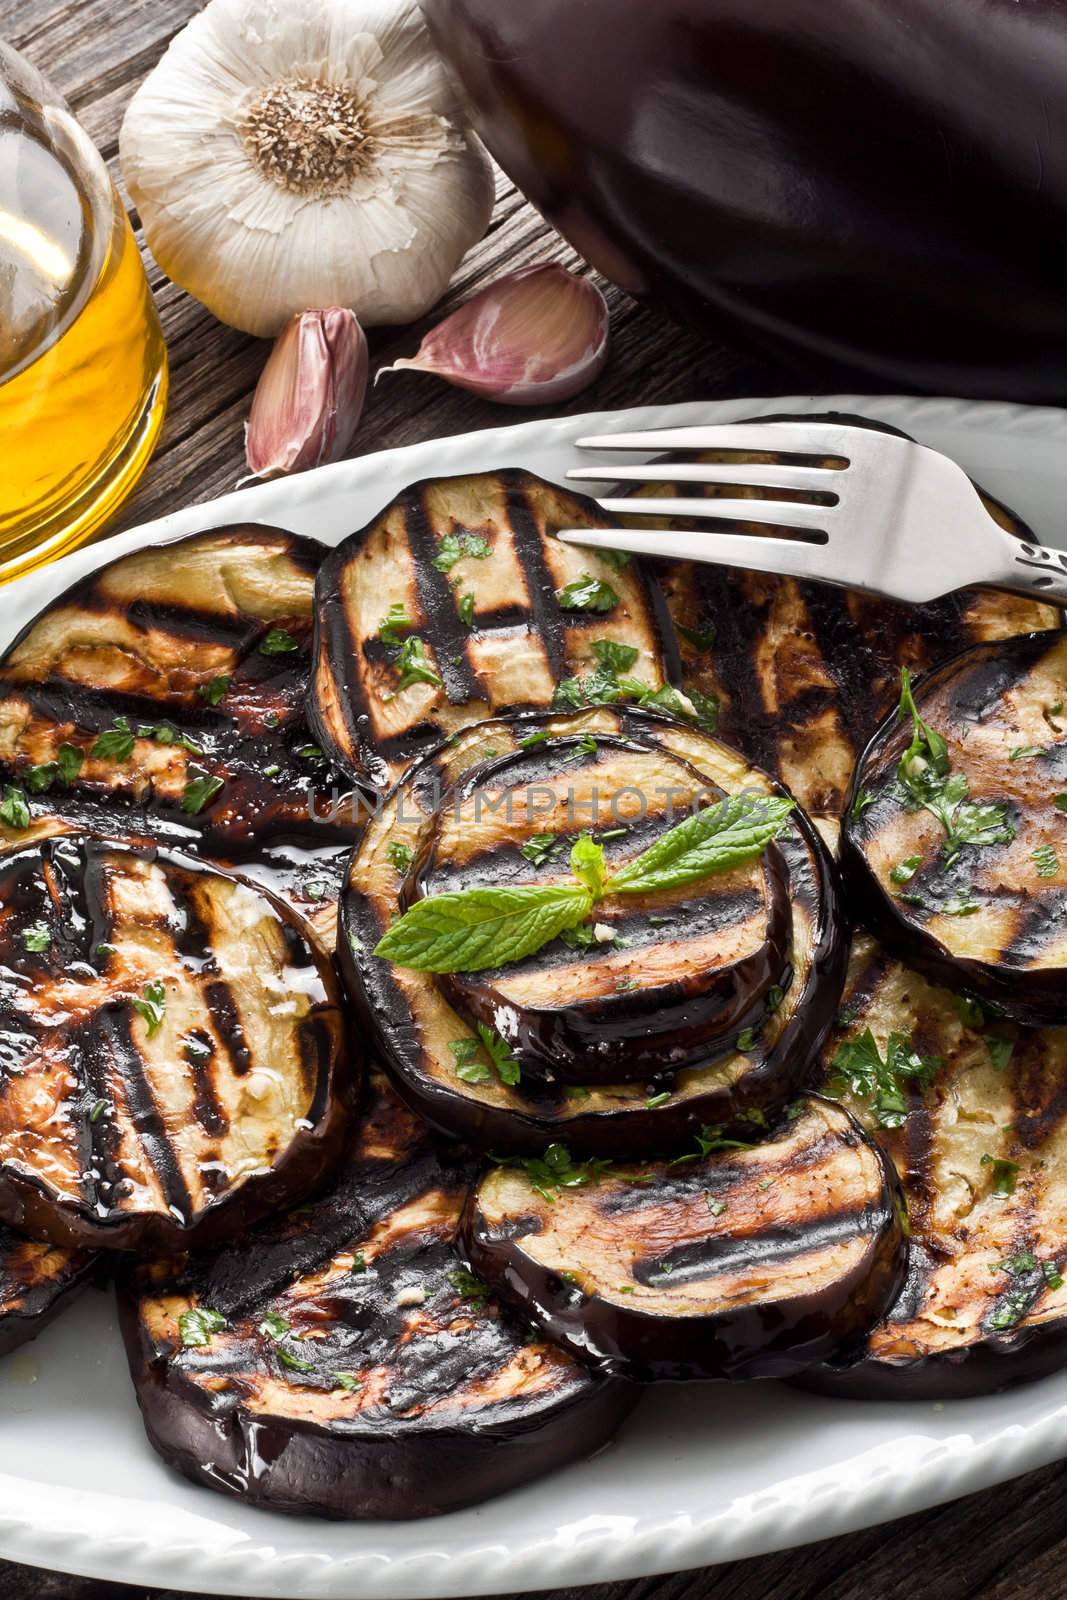 grilled eggplants seasoned with olive oil, garlic and mint